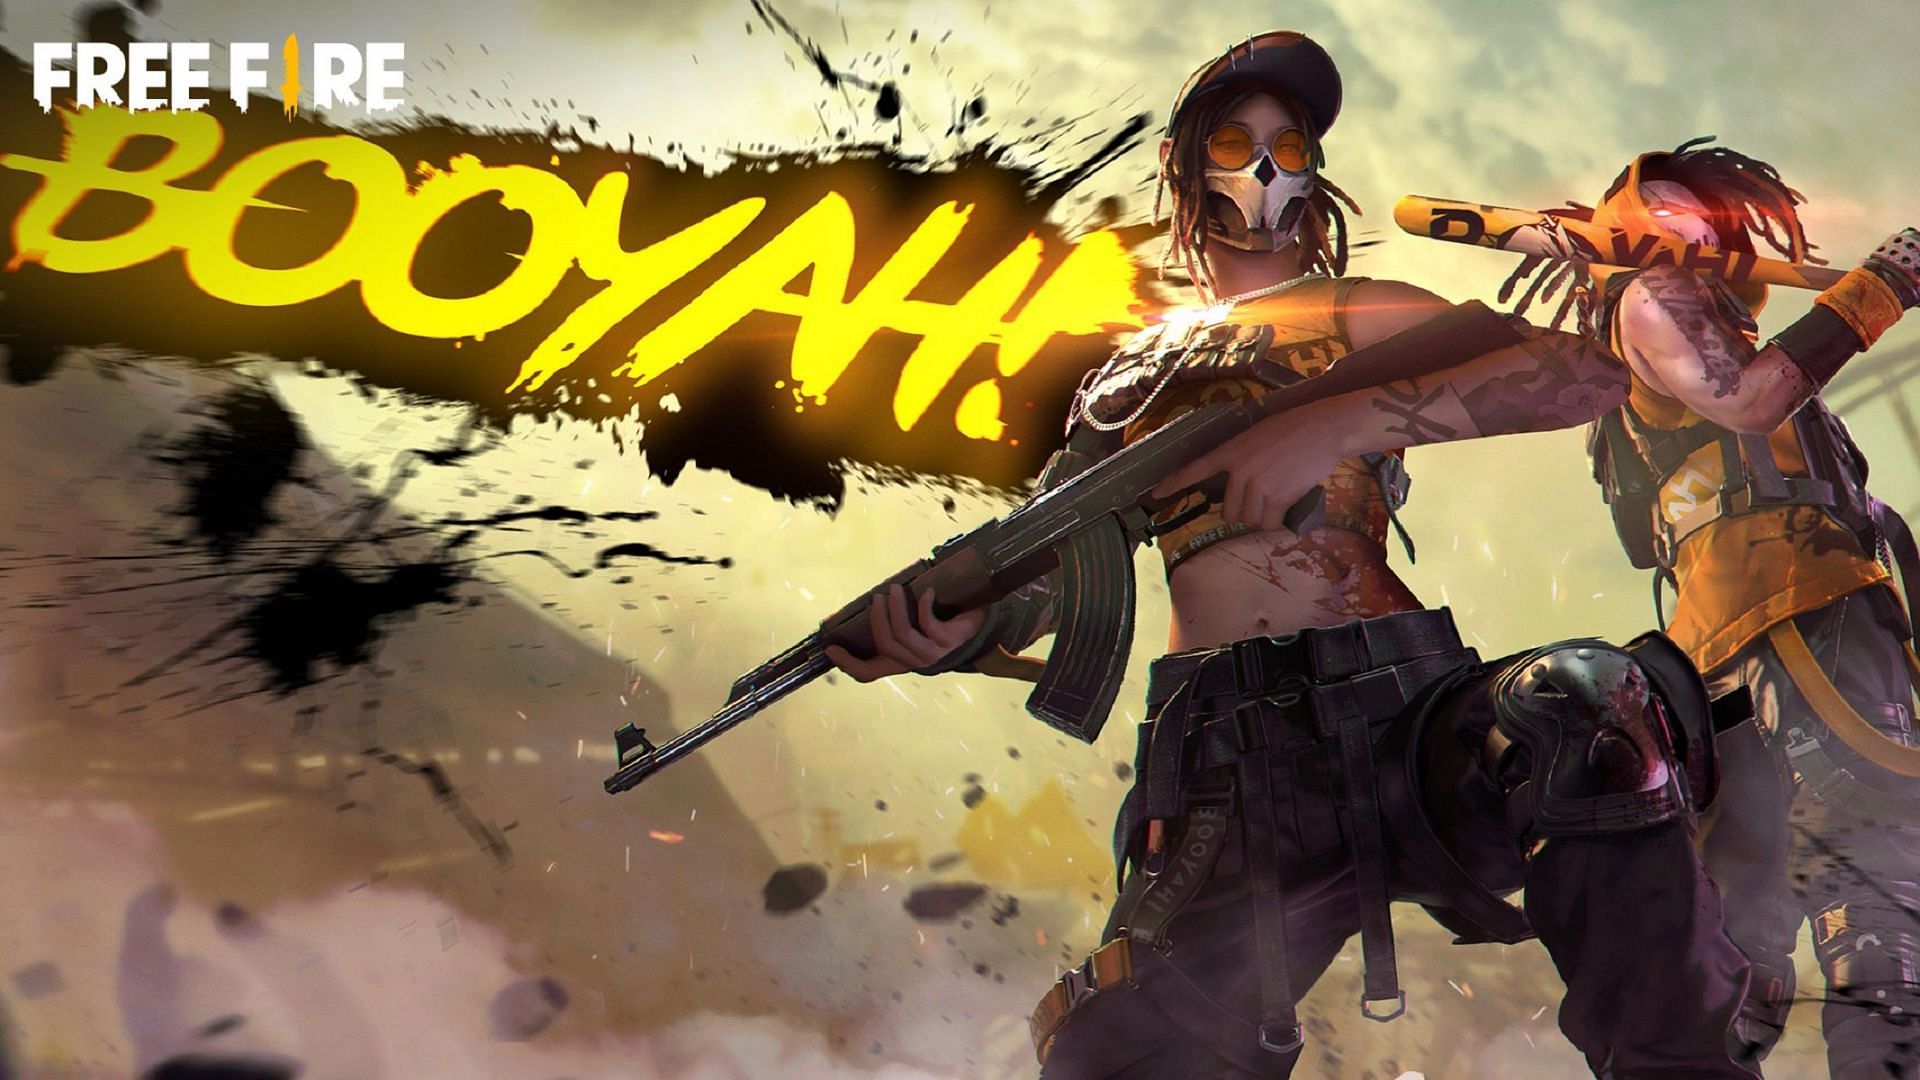 Weekend Booyah Challenge event will start on 20 November (Image via Free Fire)